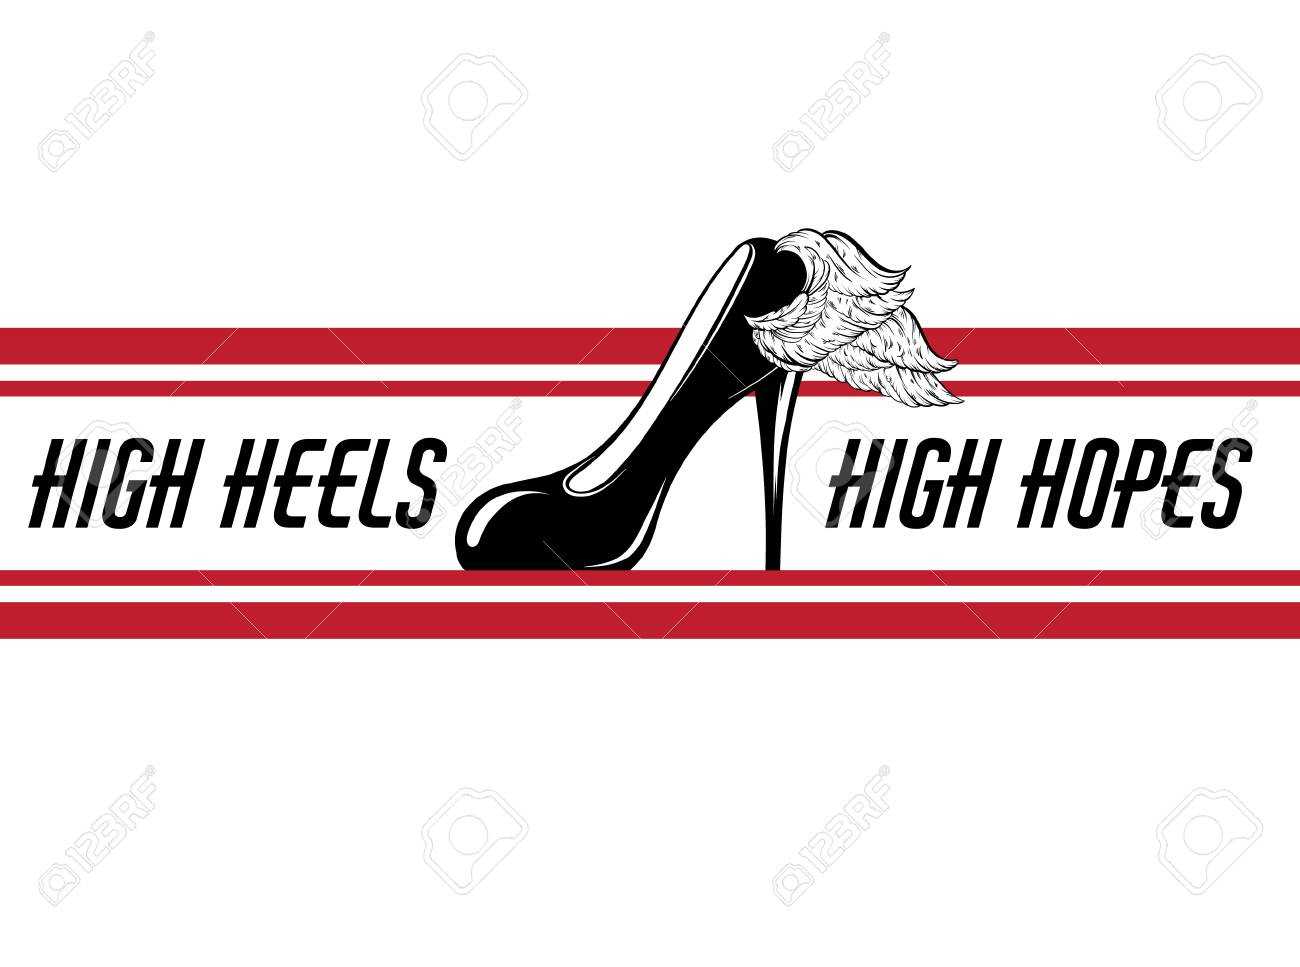 High Heels, High Hopes. Vector Hand Drawn Illustration Of Shoe.. Pertaining To High Heel Shoe Template For Card